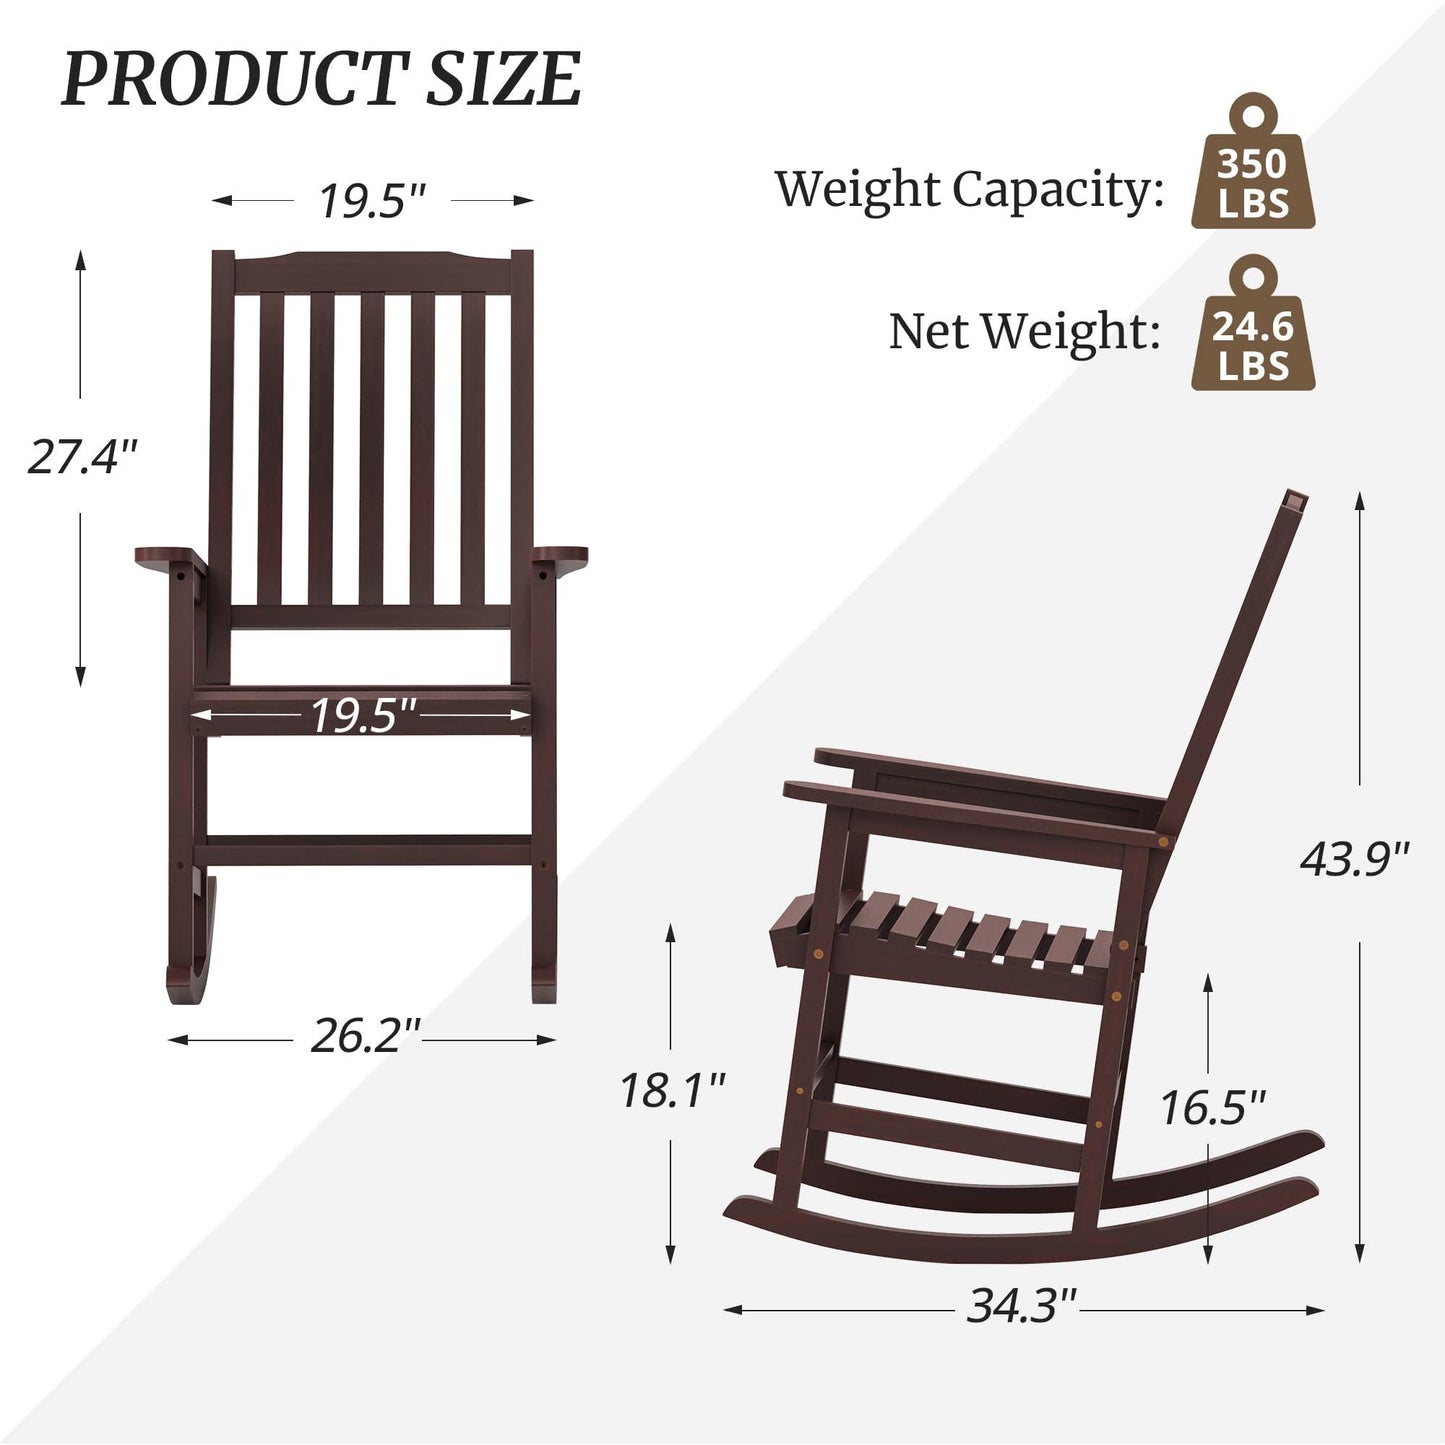 Cozyman Outdoor Rocking Chairs Set of 2, Oversized Wooden Rocking Chairs with Wide Seats, All Weather Resistant Rocker Chair, Porch Patio Chair for Backyard Lawn Garden, 350 Lbs Heavy Duty, Espresso - CookCave